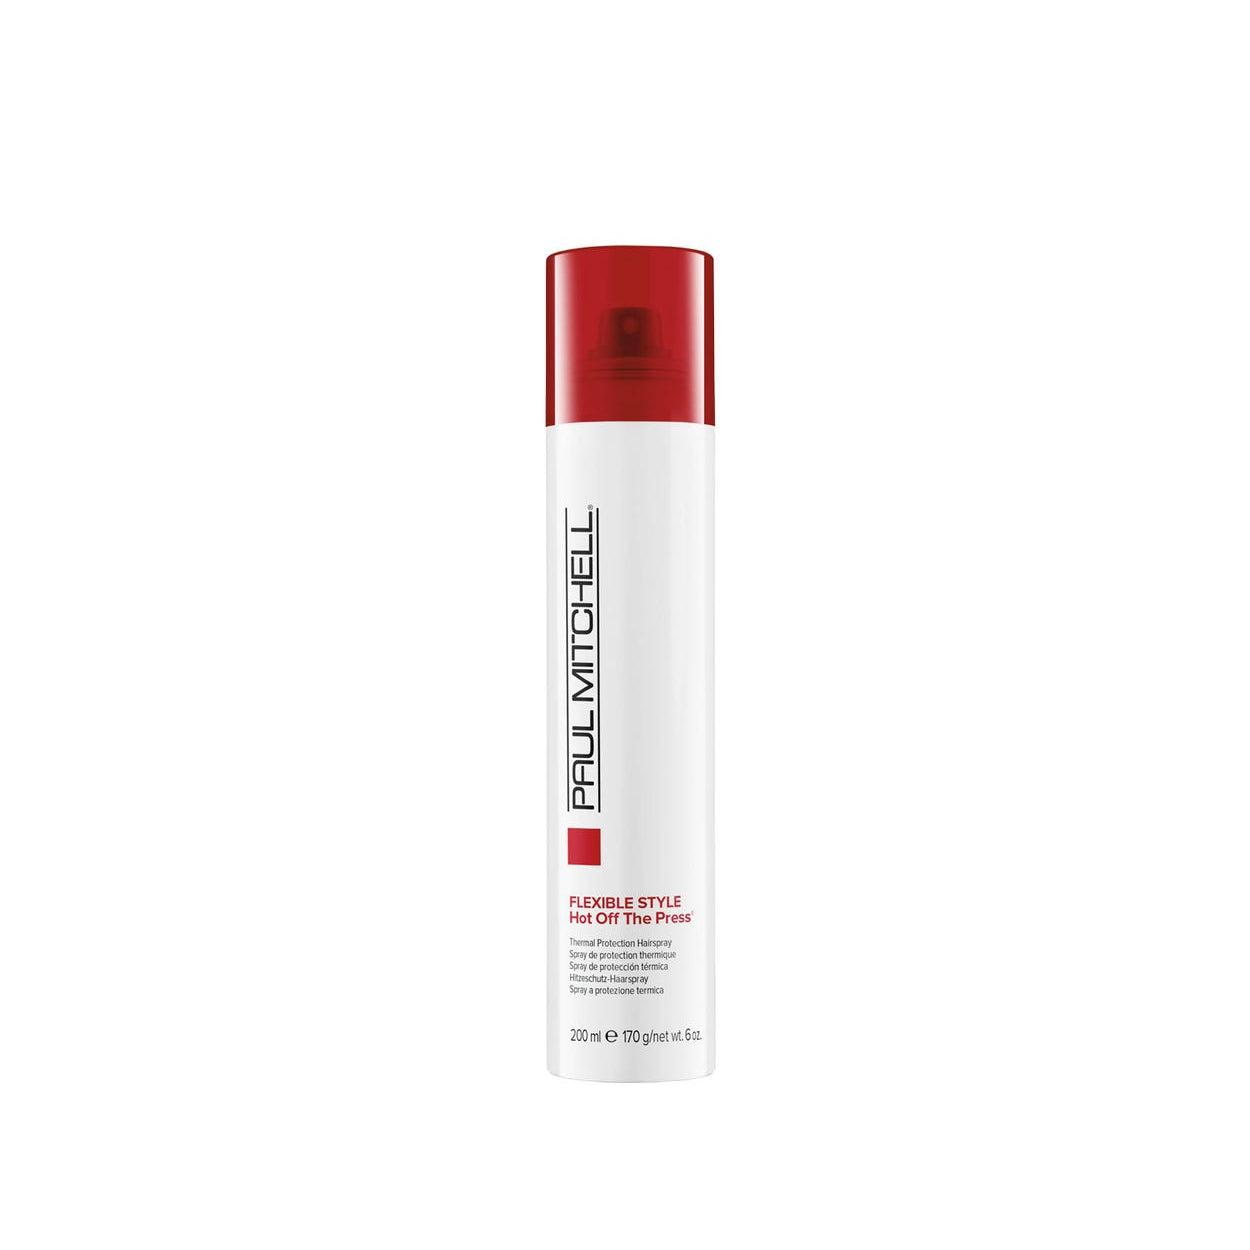 Paul Mitchell hot of the press 200ml